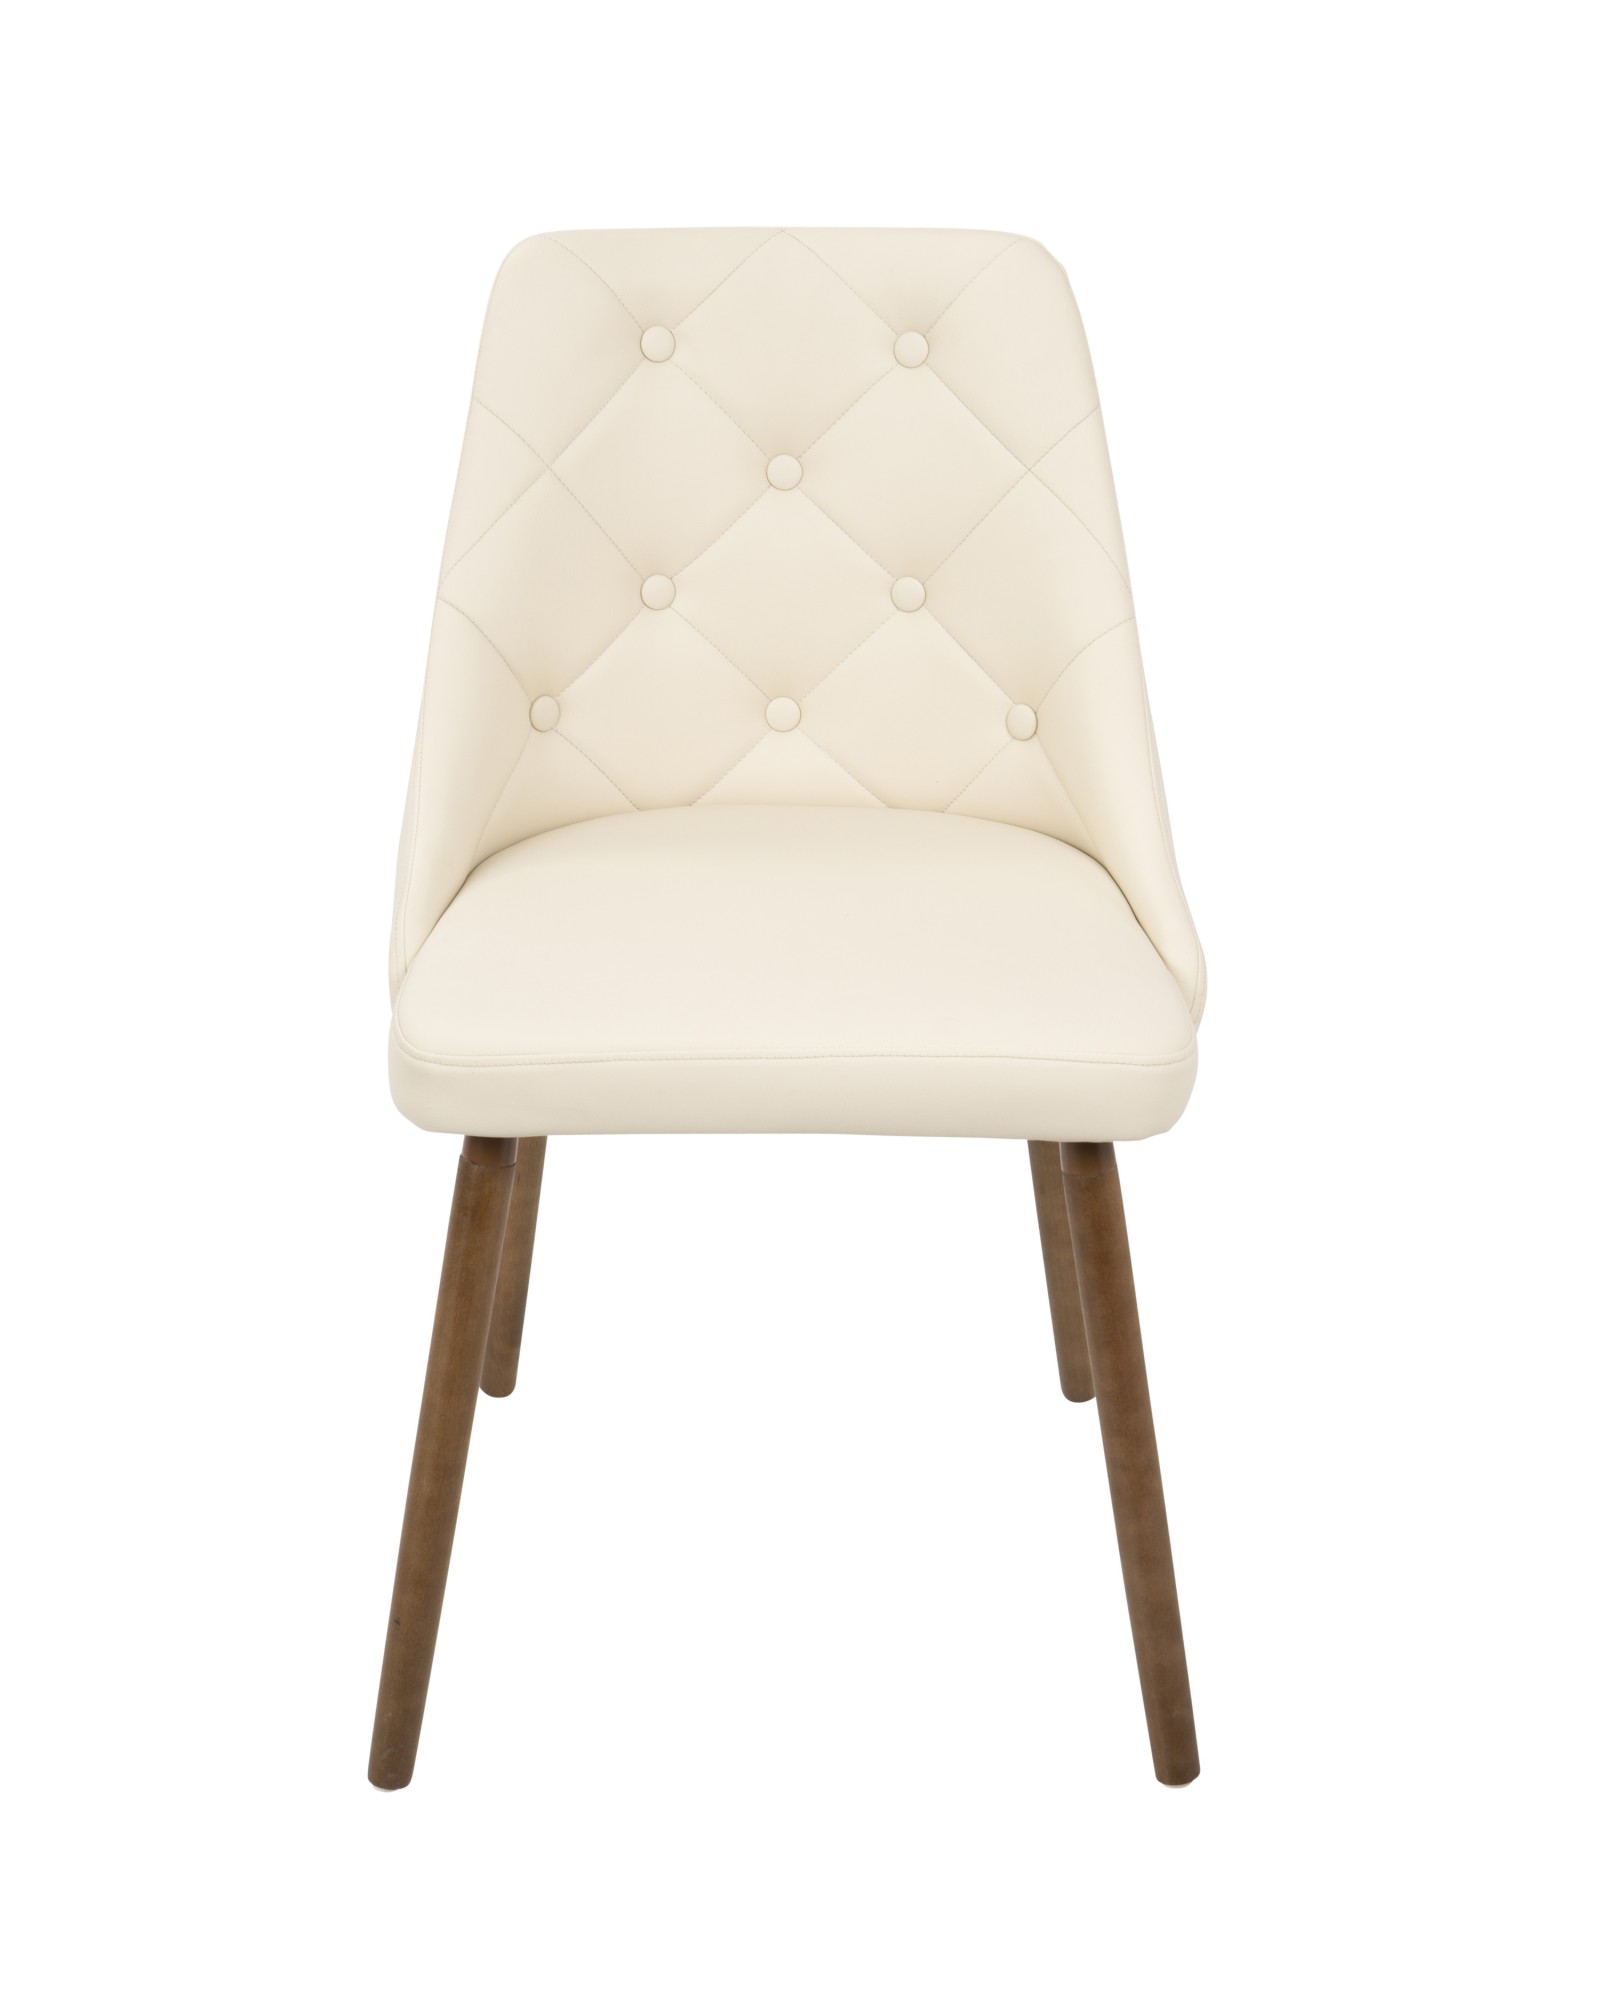 Giovanni Mid-Century Modern Dining/Accent Chair in Walnut and Cream Quilted Faux Leather